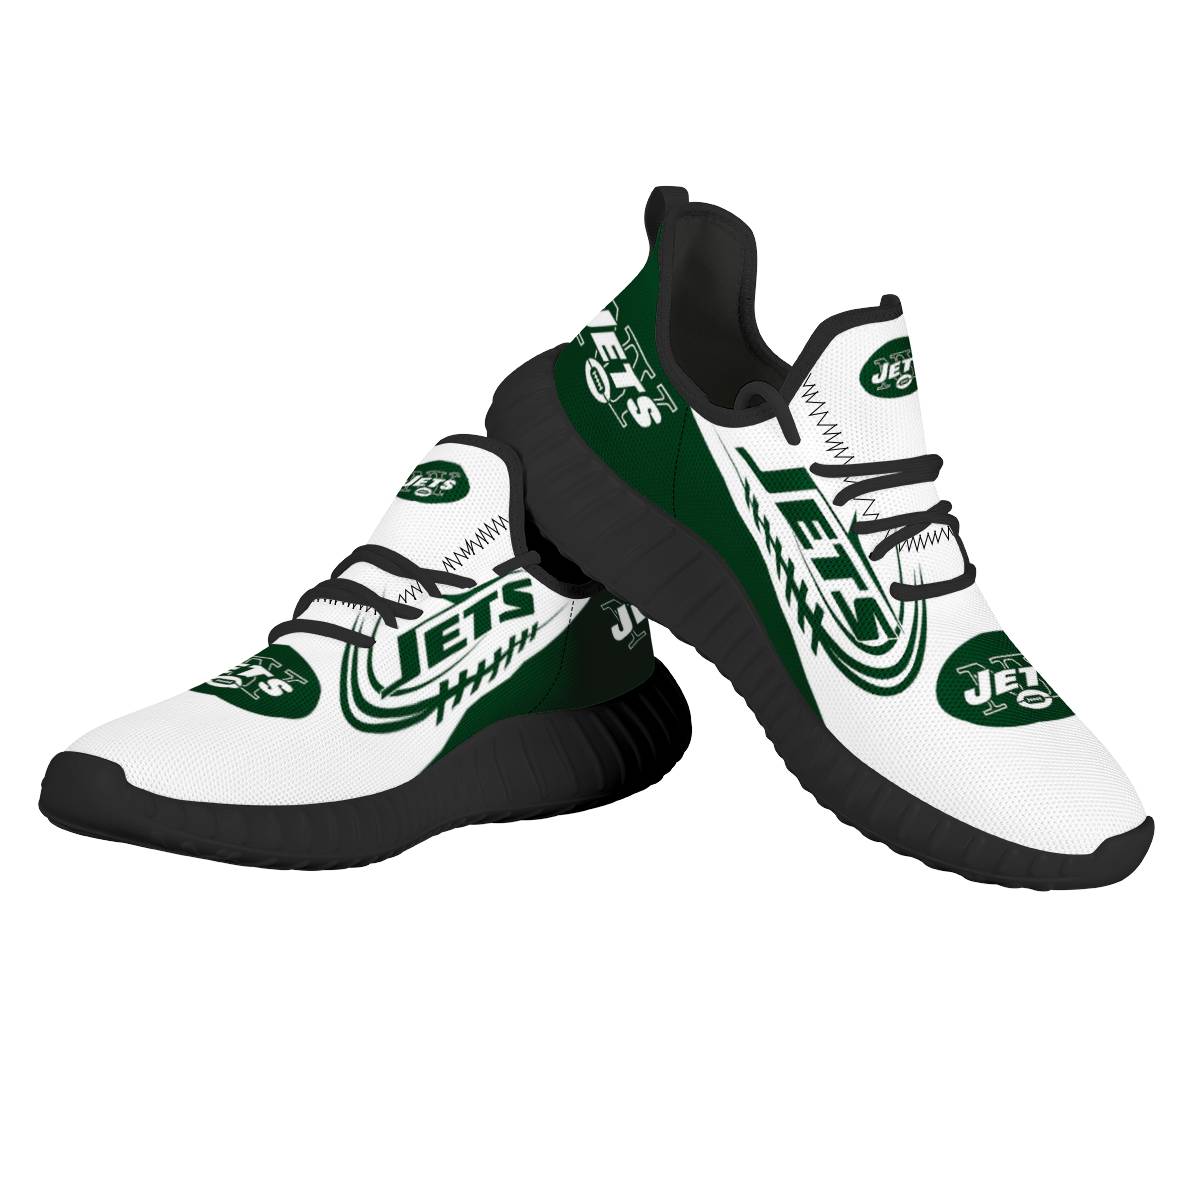 Men's NFL New York Jets Mesh Knit Sneakers/Shoes 002